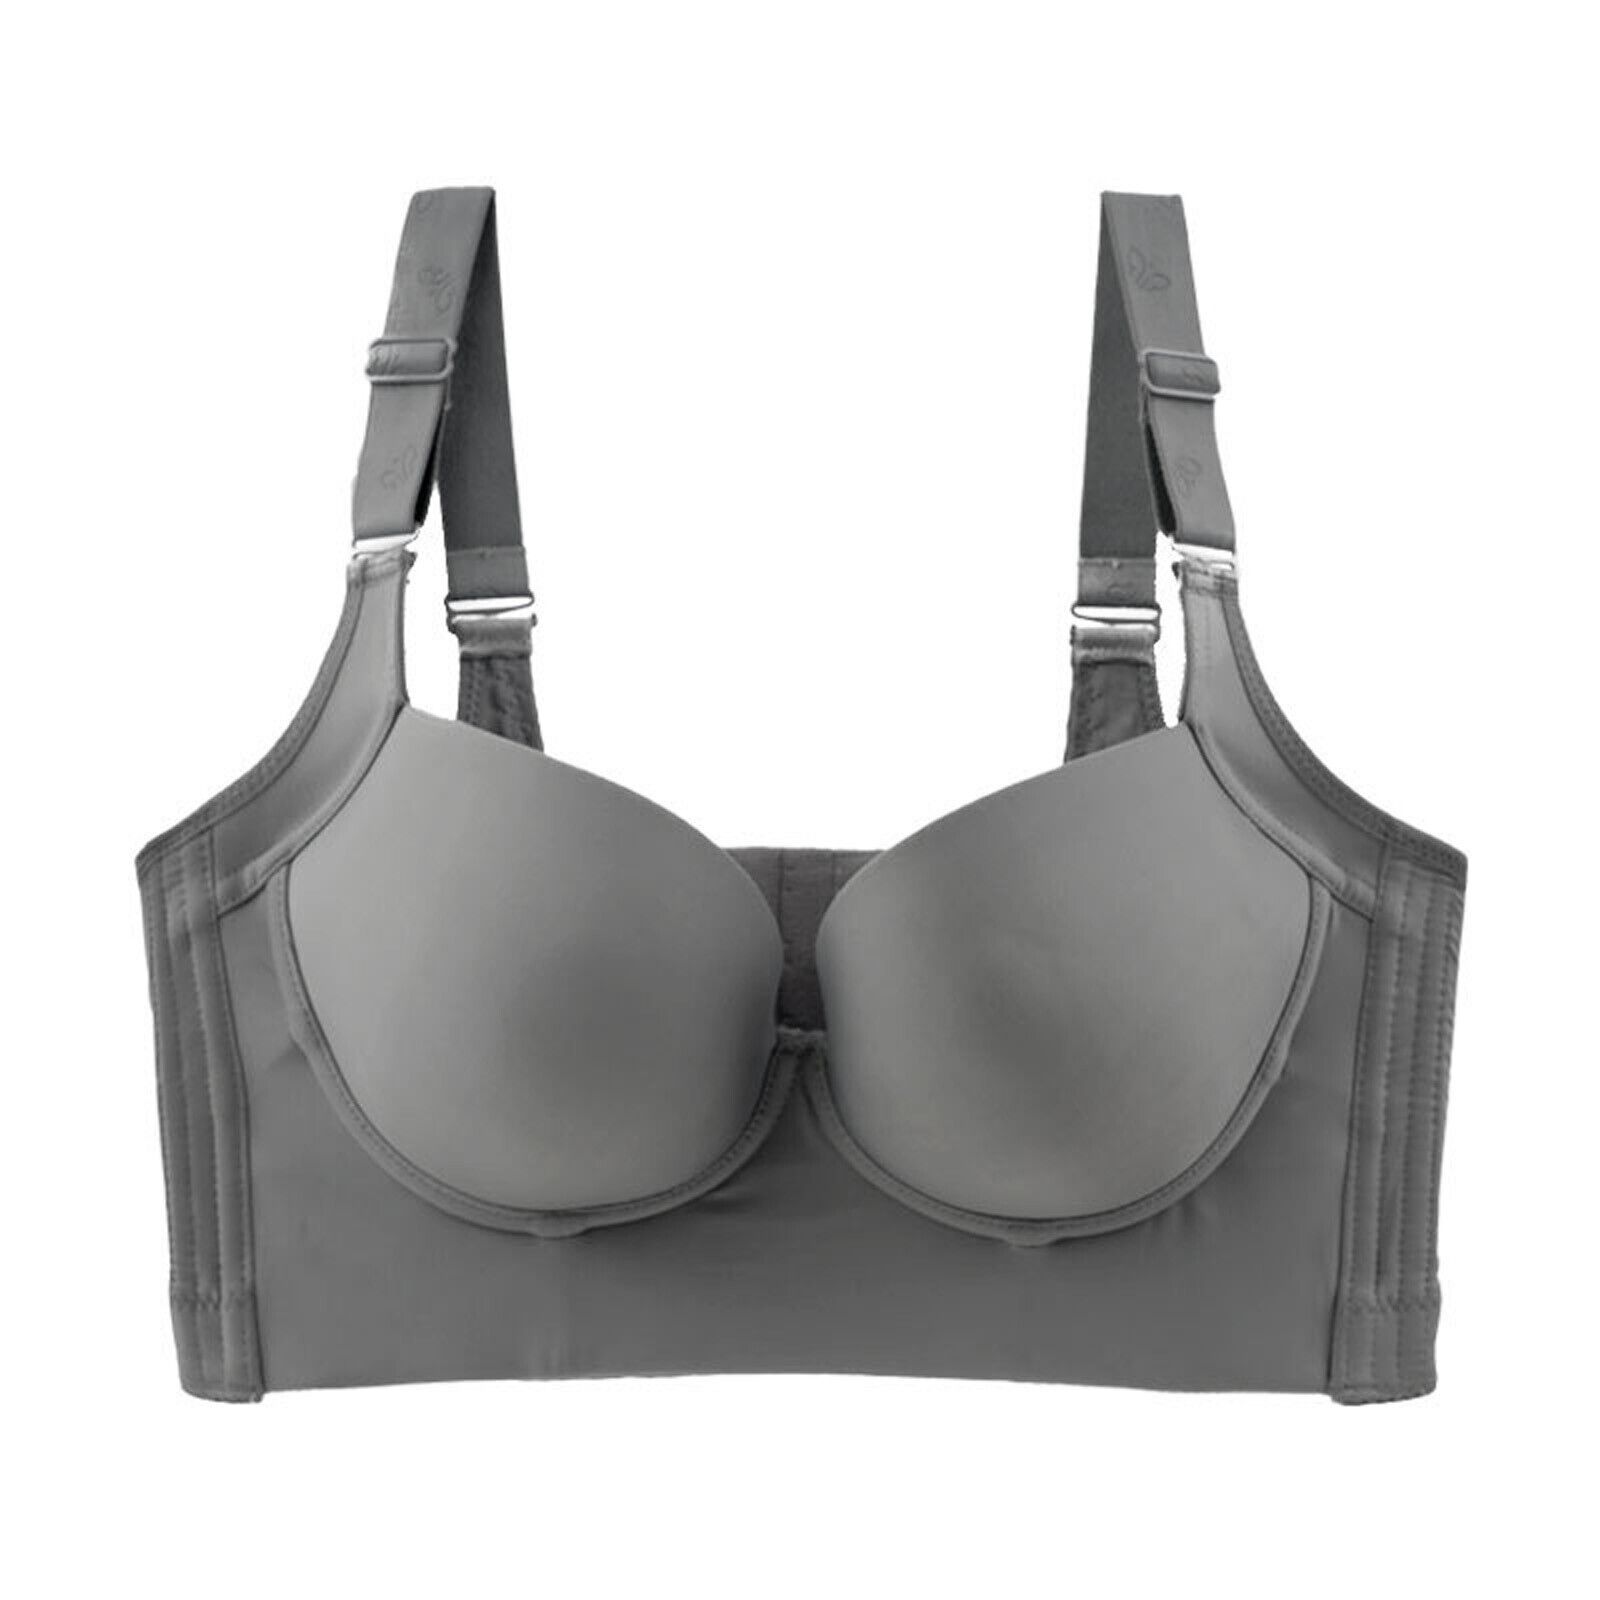 Foraging dimple Fashion Deep Cup Bra Hides Back Fat Diva New Look Bra With  Shapewear Incorporated Gray 